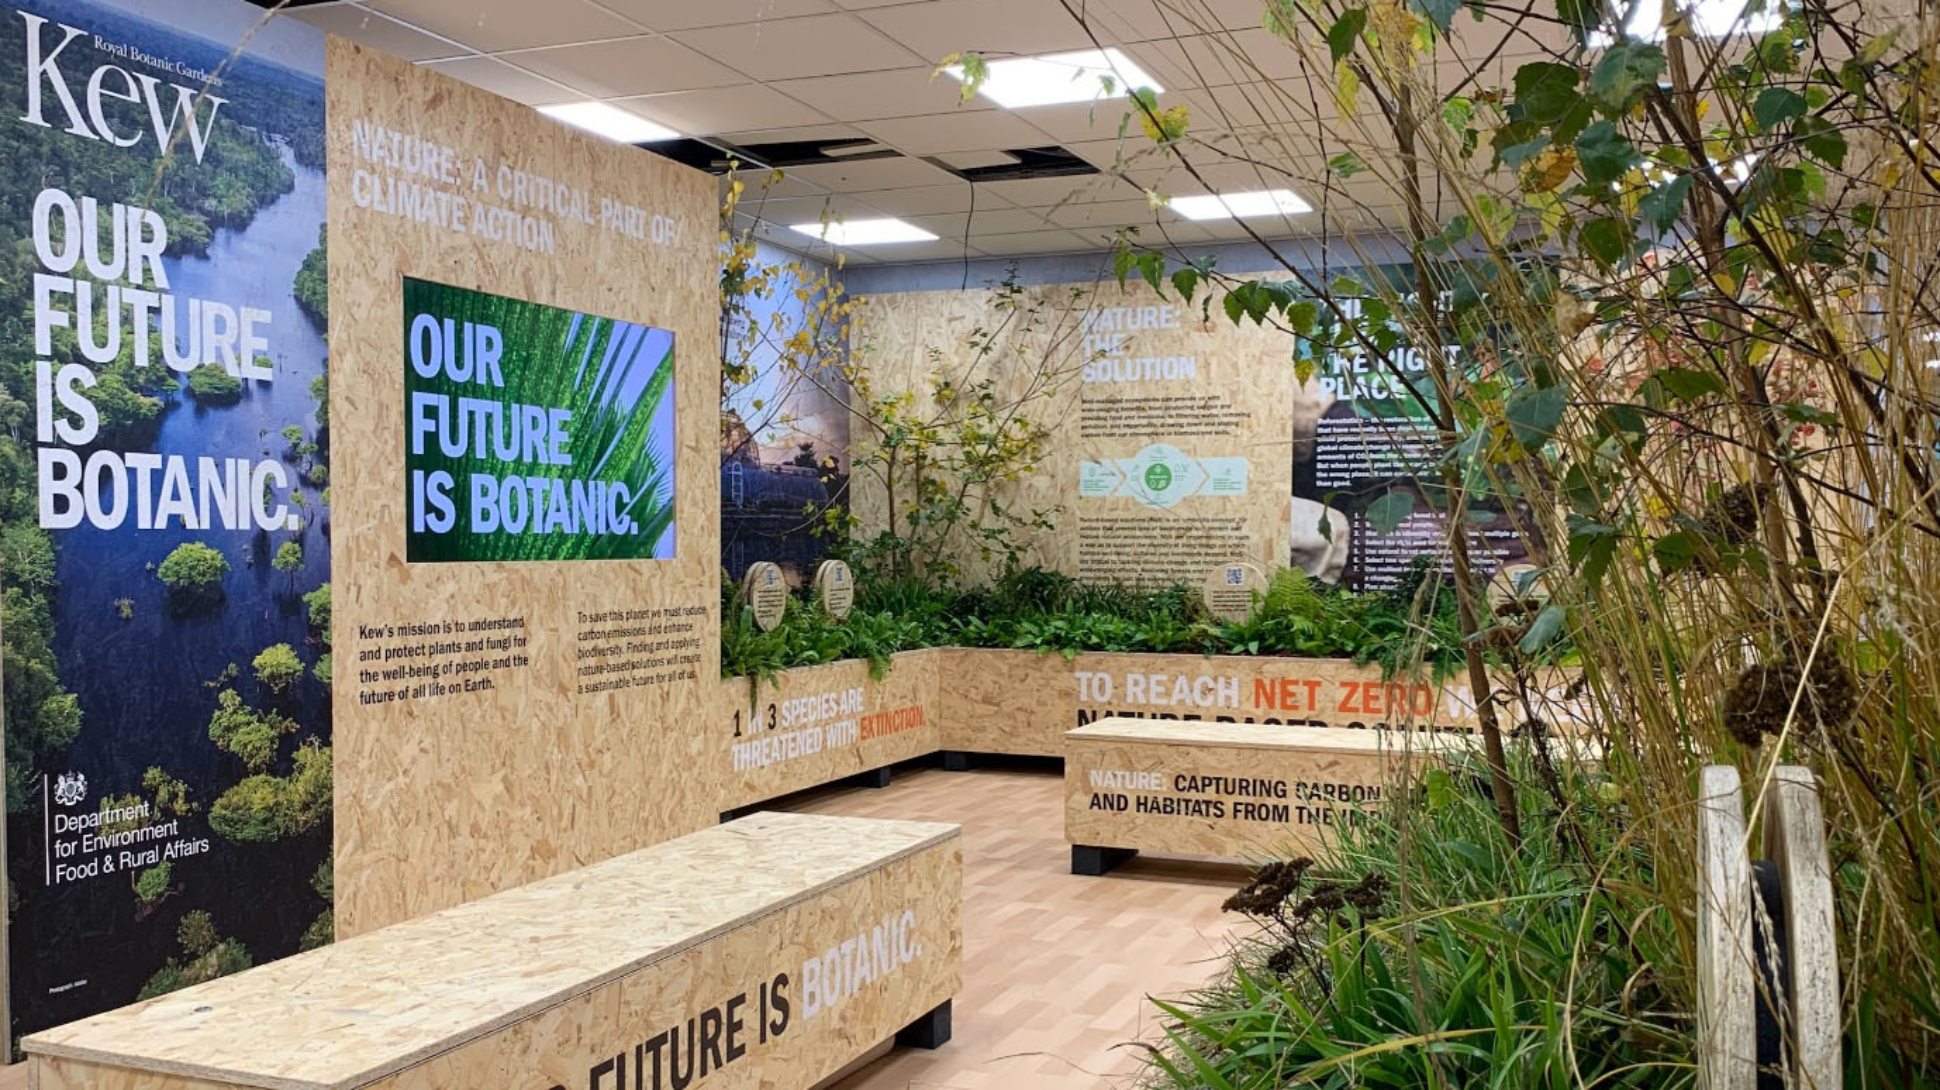 A booth made from wood with many plants and panels about the importance of plants in protecting against climate change